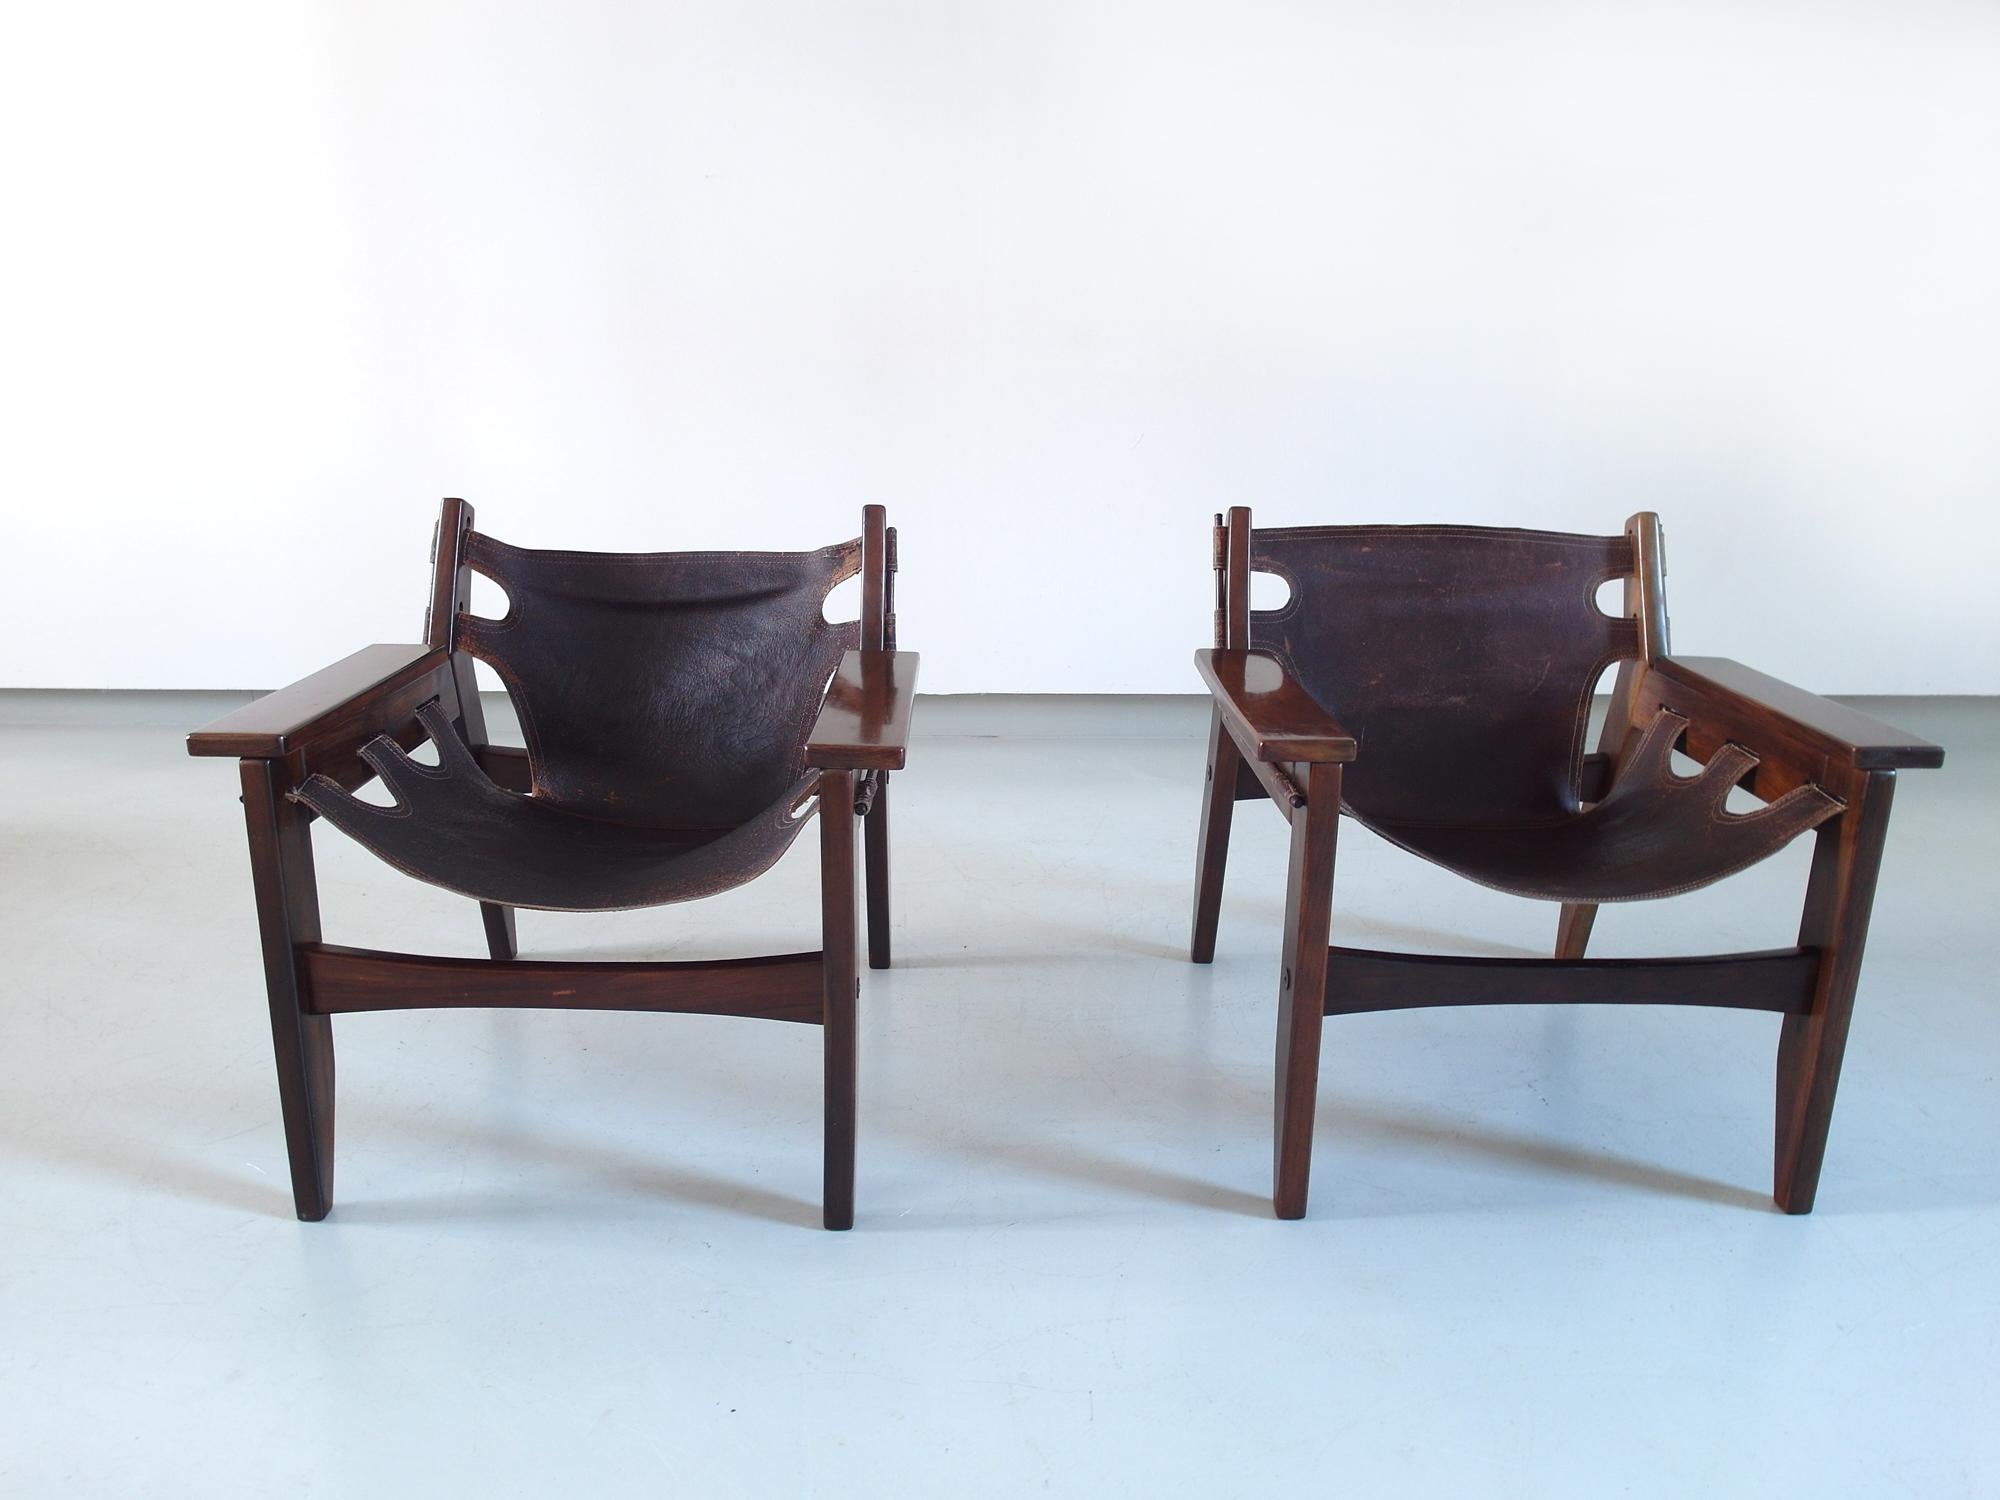 Mid-Century Modern Pair of Sergio Rodrigues Kilin Lounge Chairs for Oca, Brazil, 1973 For Sale